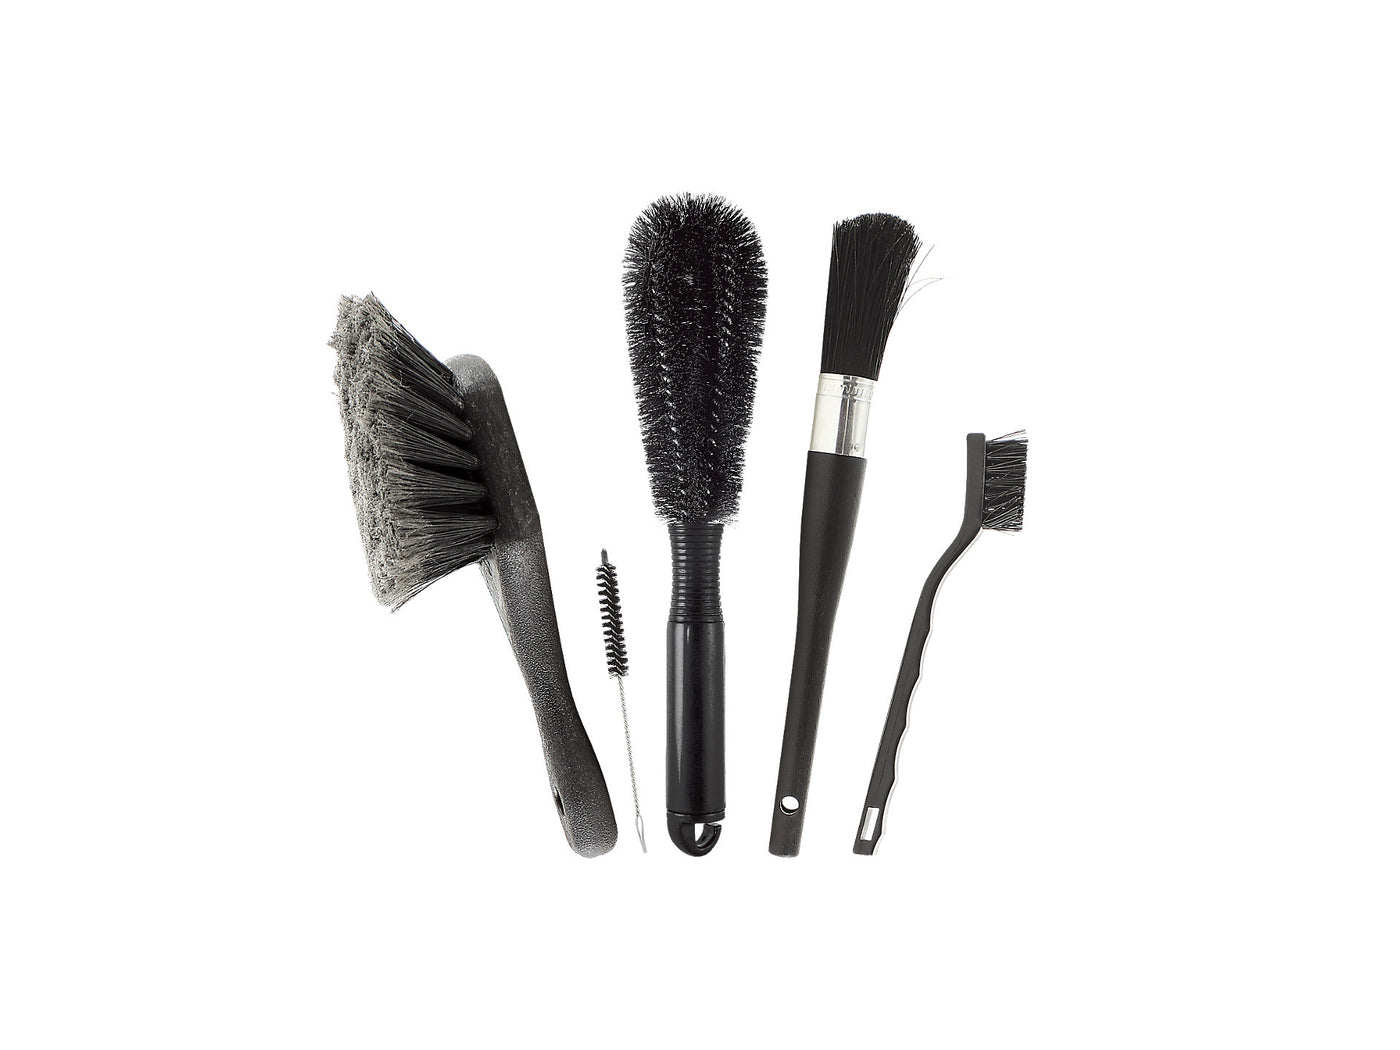 Finish Line Mechanic's Brush Set for Cleaning Bicycles, Motorcycles, and Automob